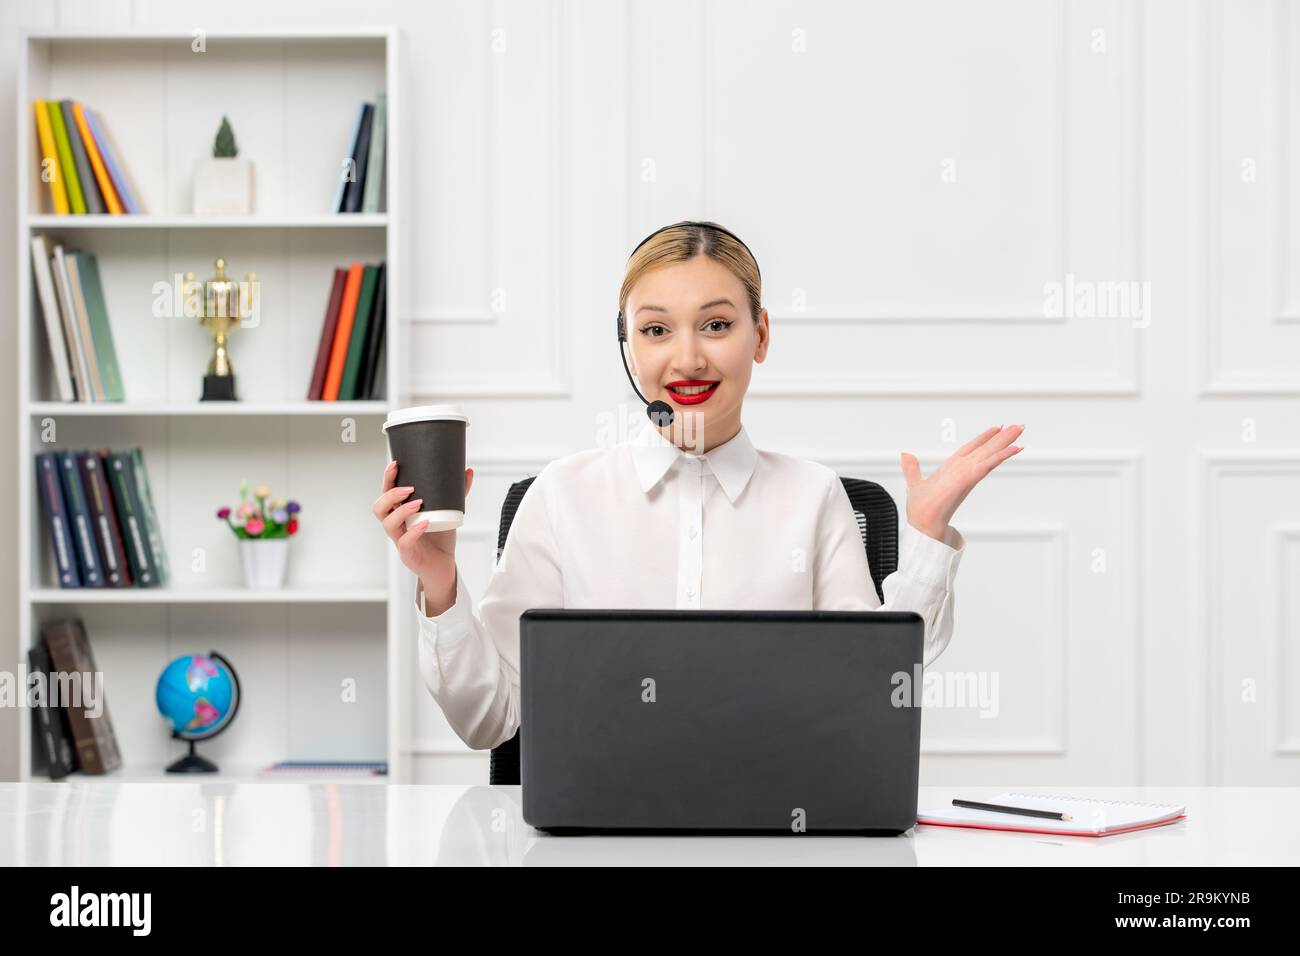 customer service cute blonde girl office shirt with headset and computer waving hands and smiling Stock Photo